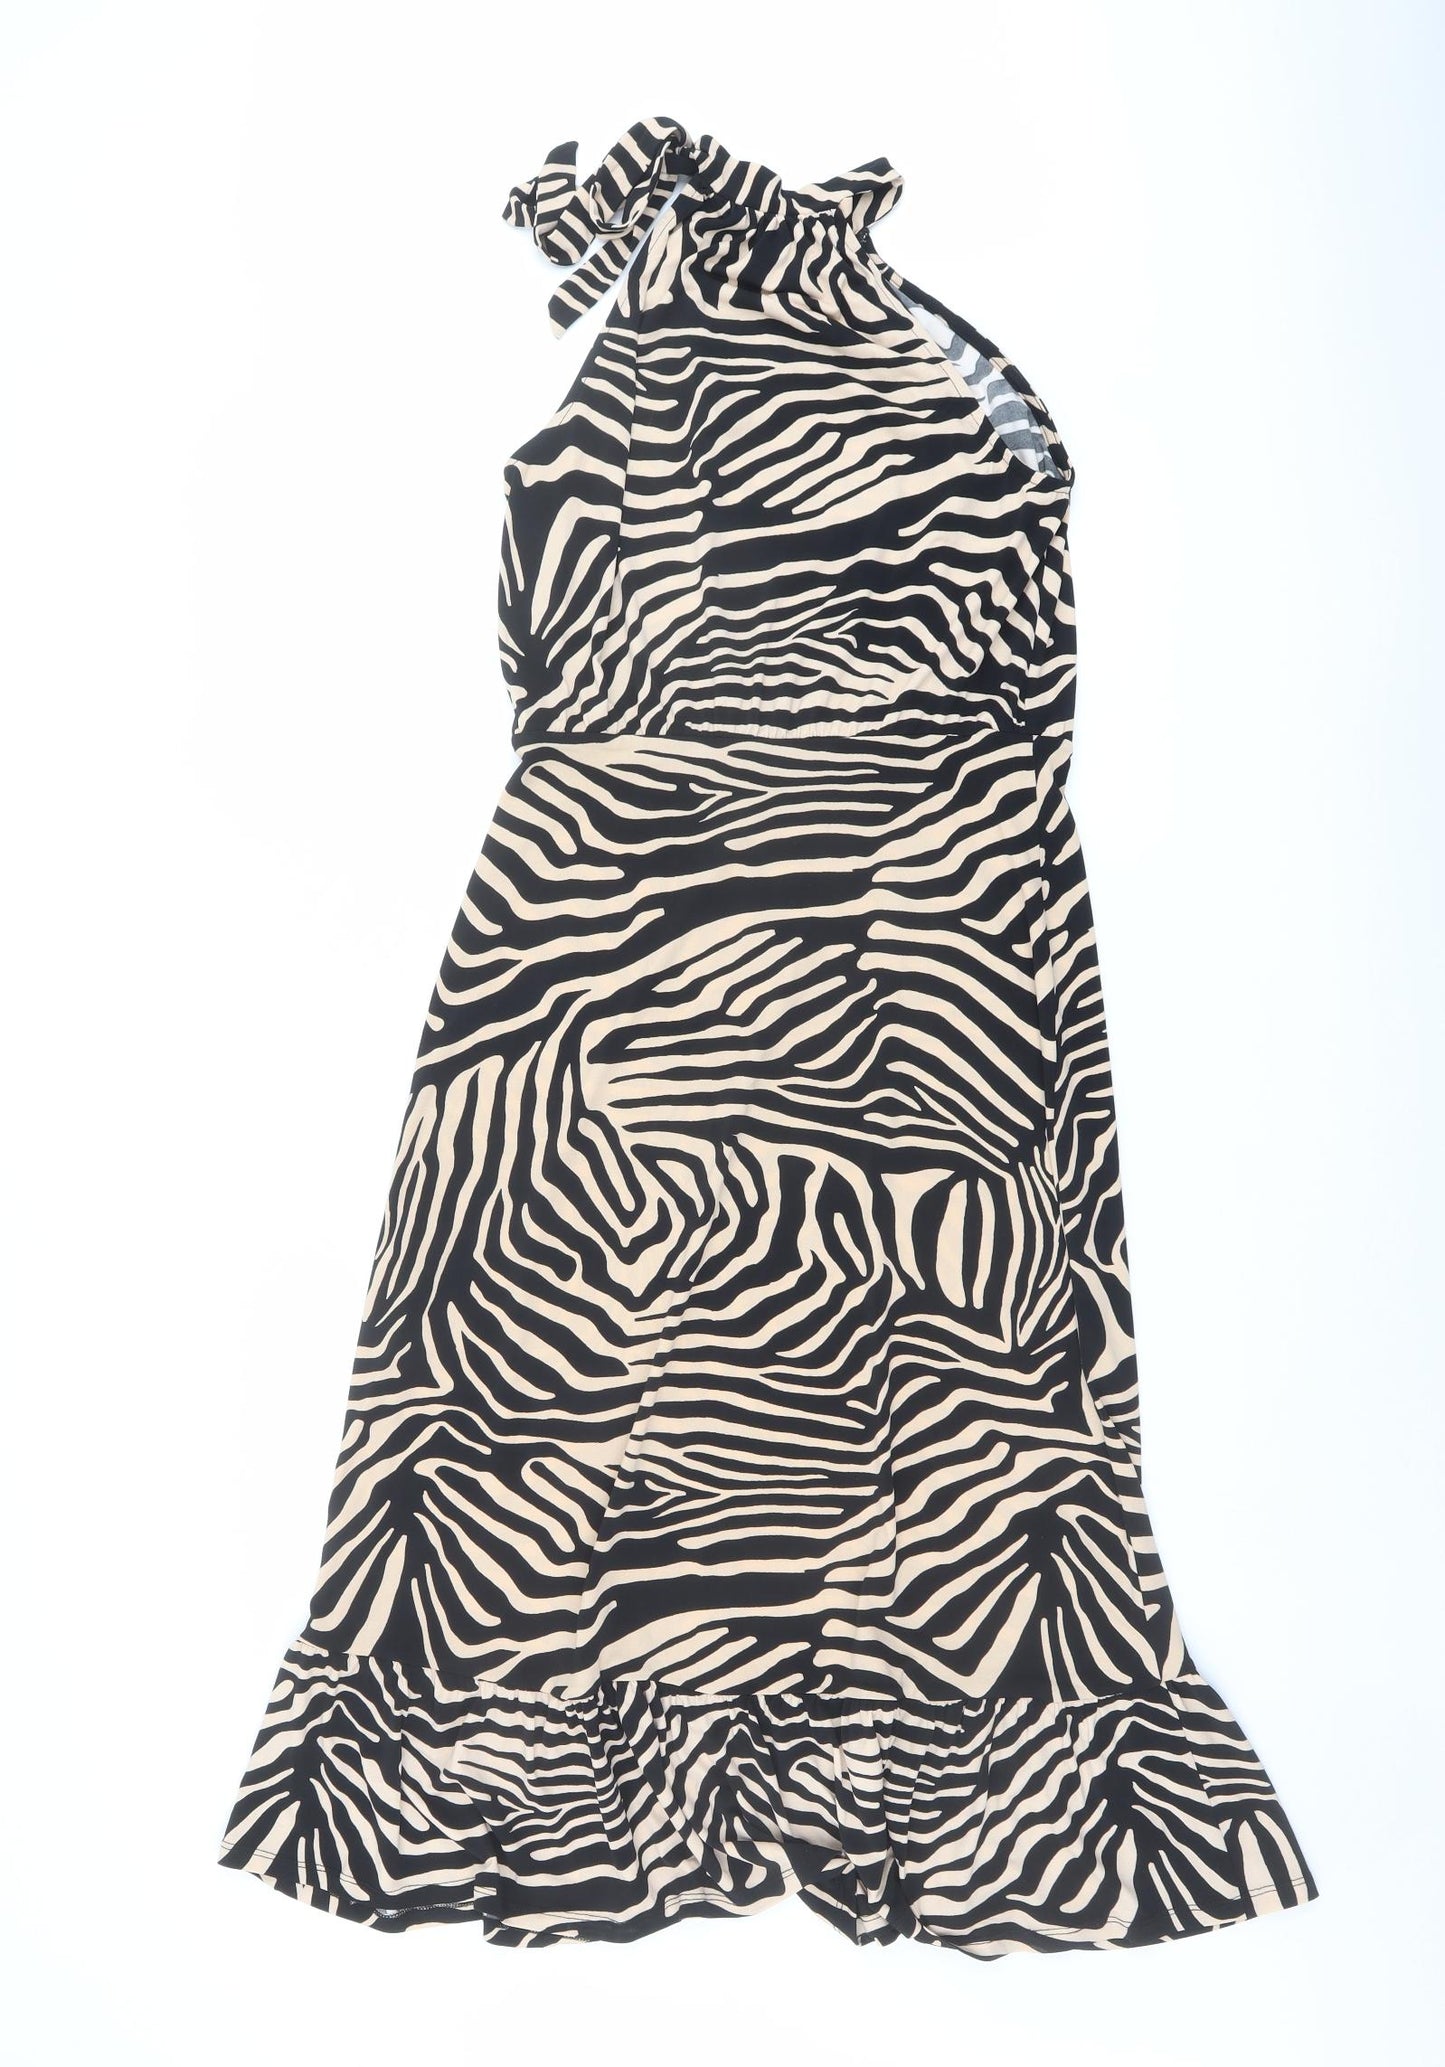 Oasis Womens Black Animal Print Polyester Shift Size S Halter Tie